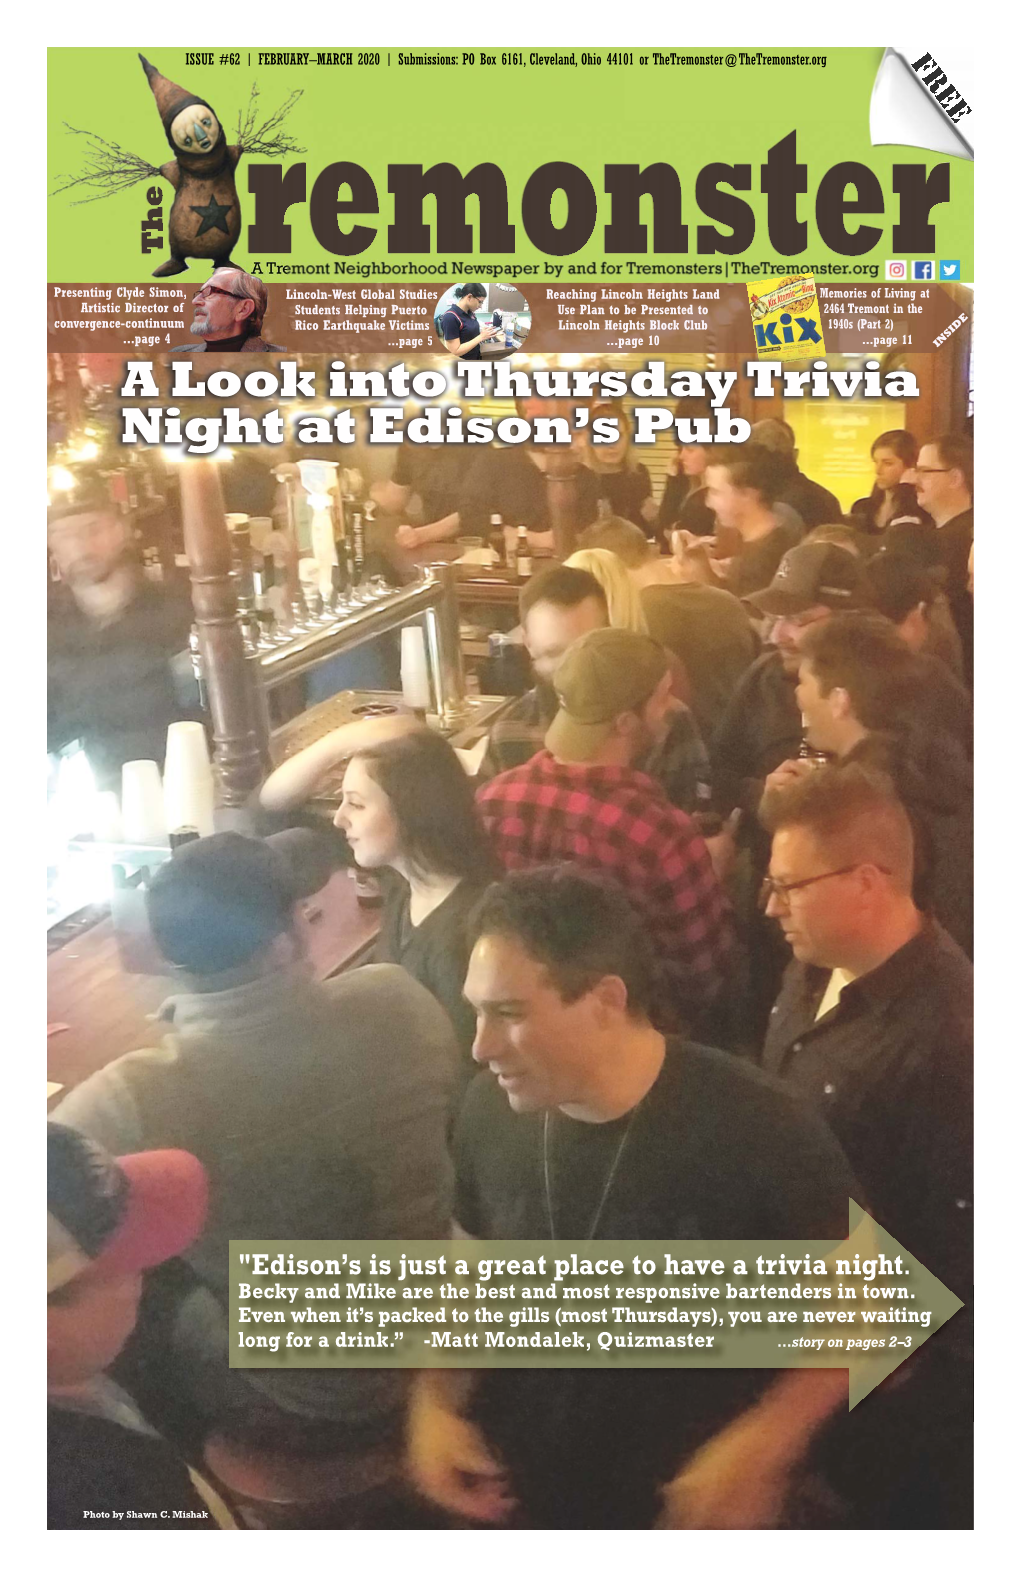 A Look Into Thursday Trivia Night at Edison's